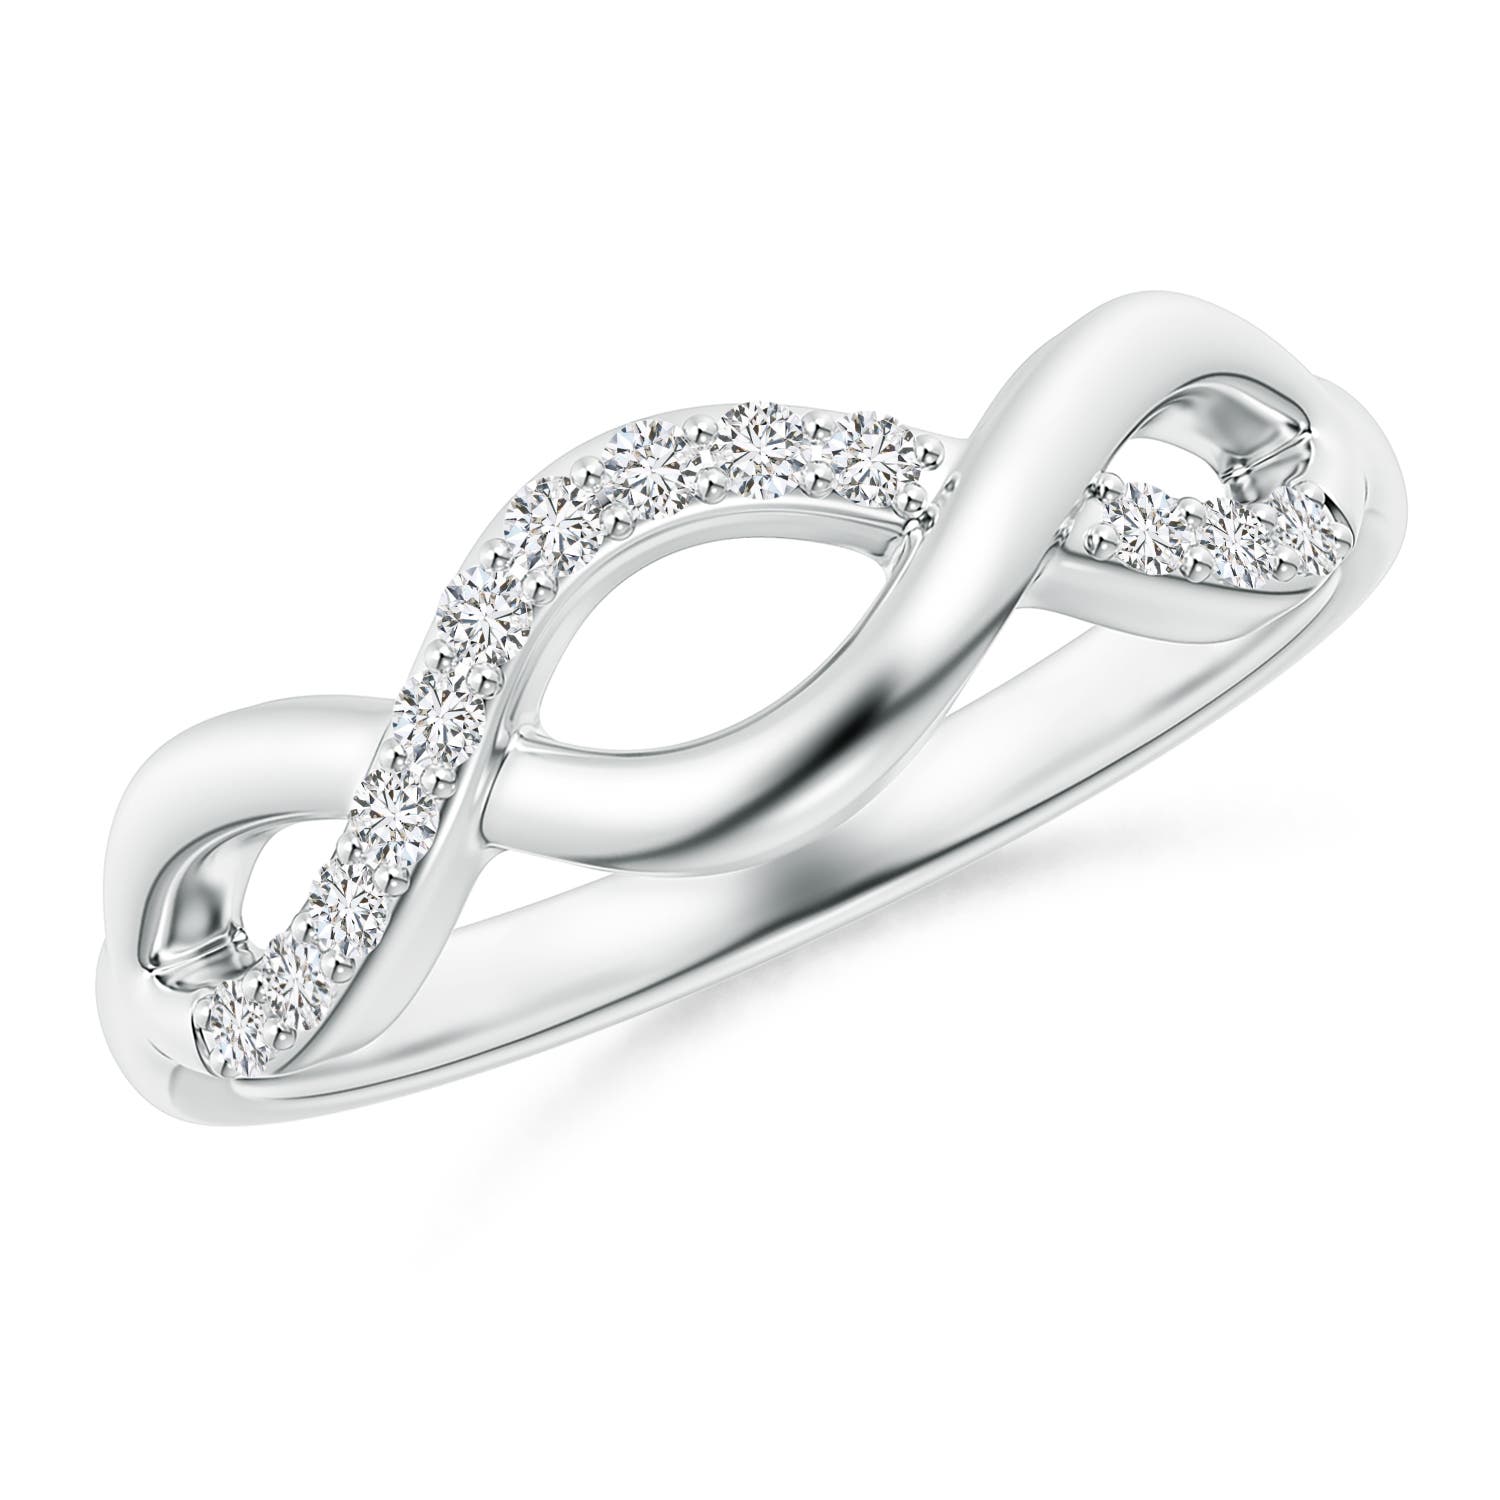 H, SI2 / 0.14 CT / 14 KT White Gold